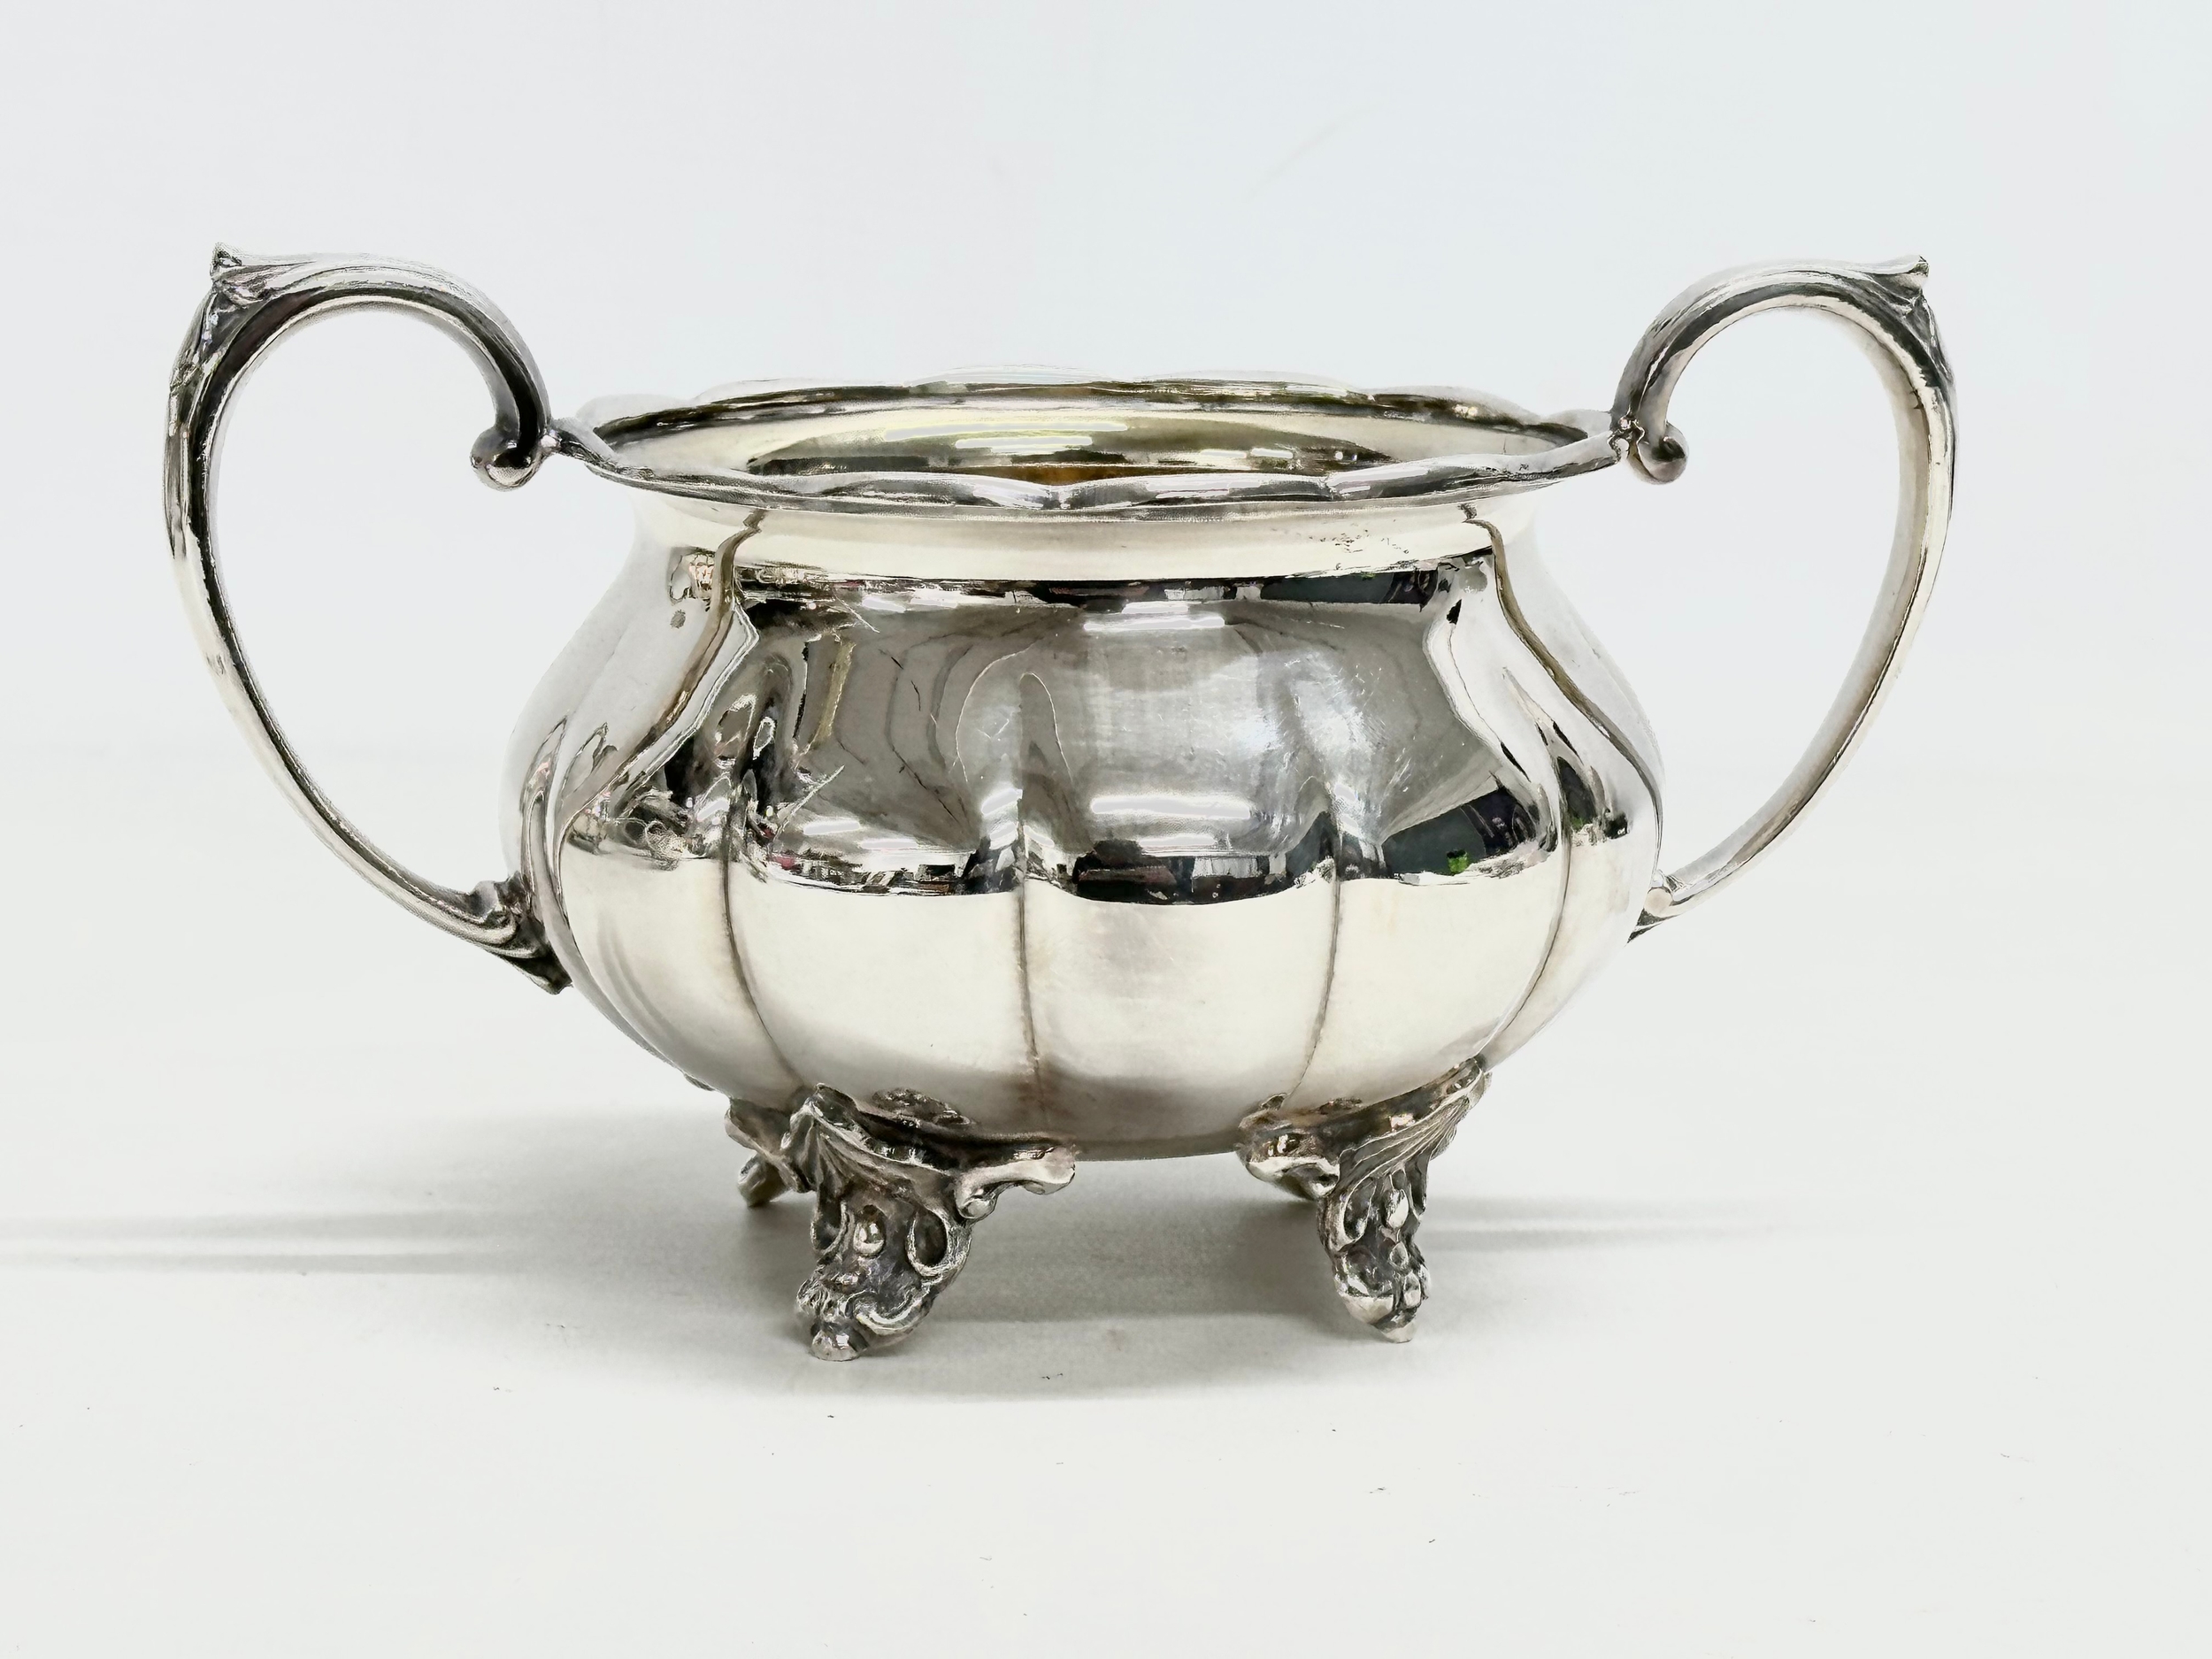 A 4 piece Georgian style silver plated tea service by Cooper Brothers. - Image 4 of 5